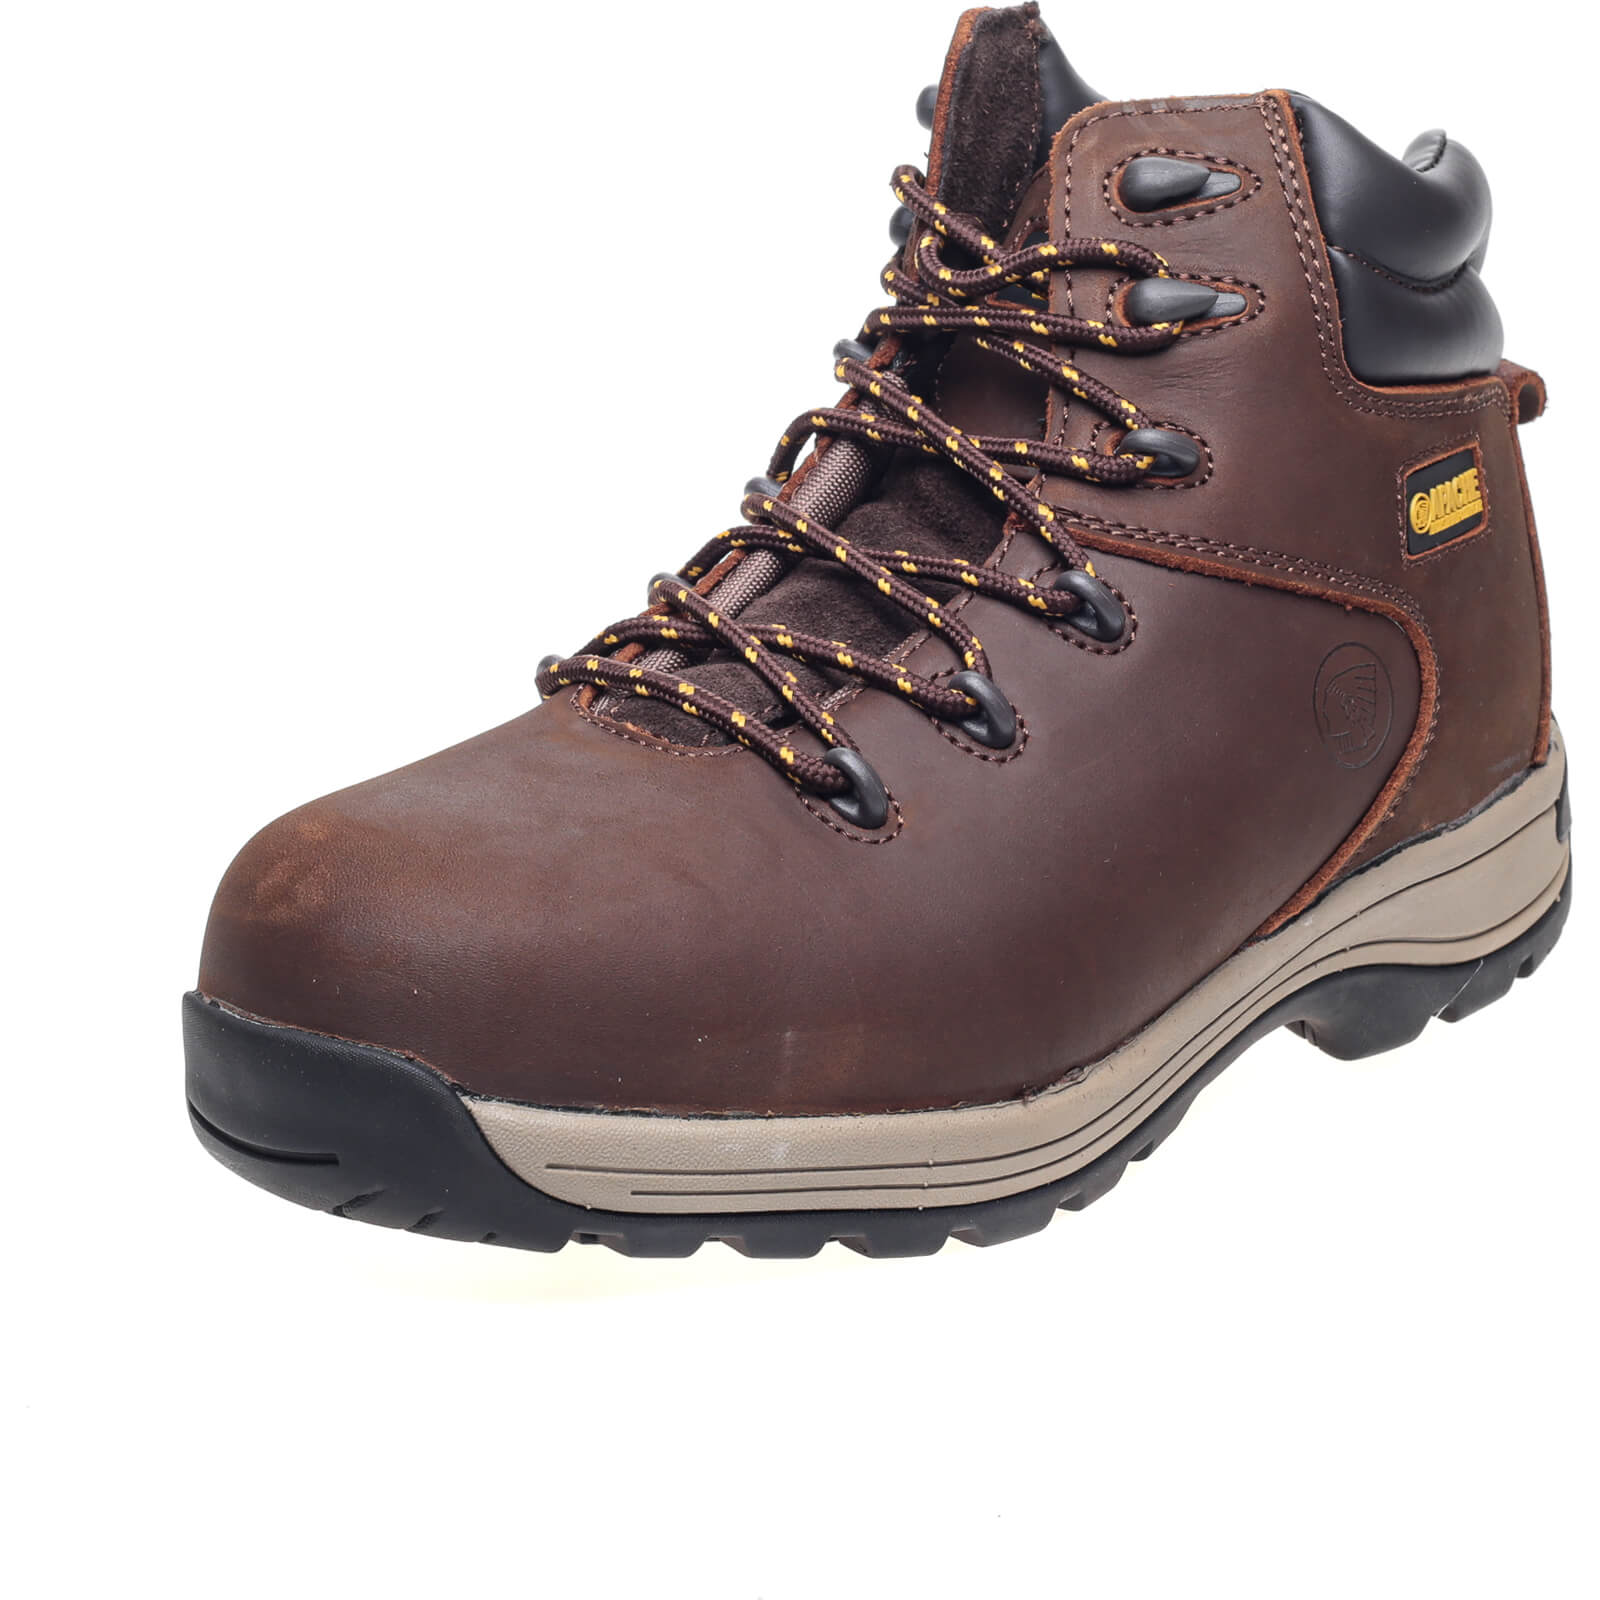 Image of Apache AP31 Nubuck Water Resistant Safety Hiker Boots Brown Size 9